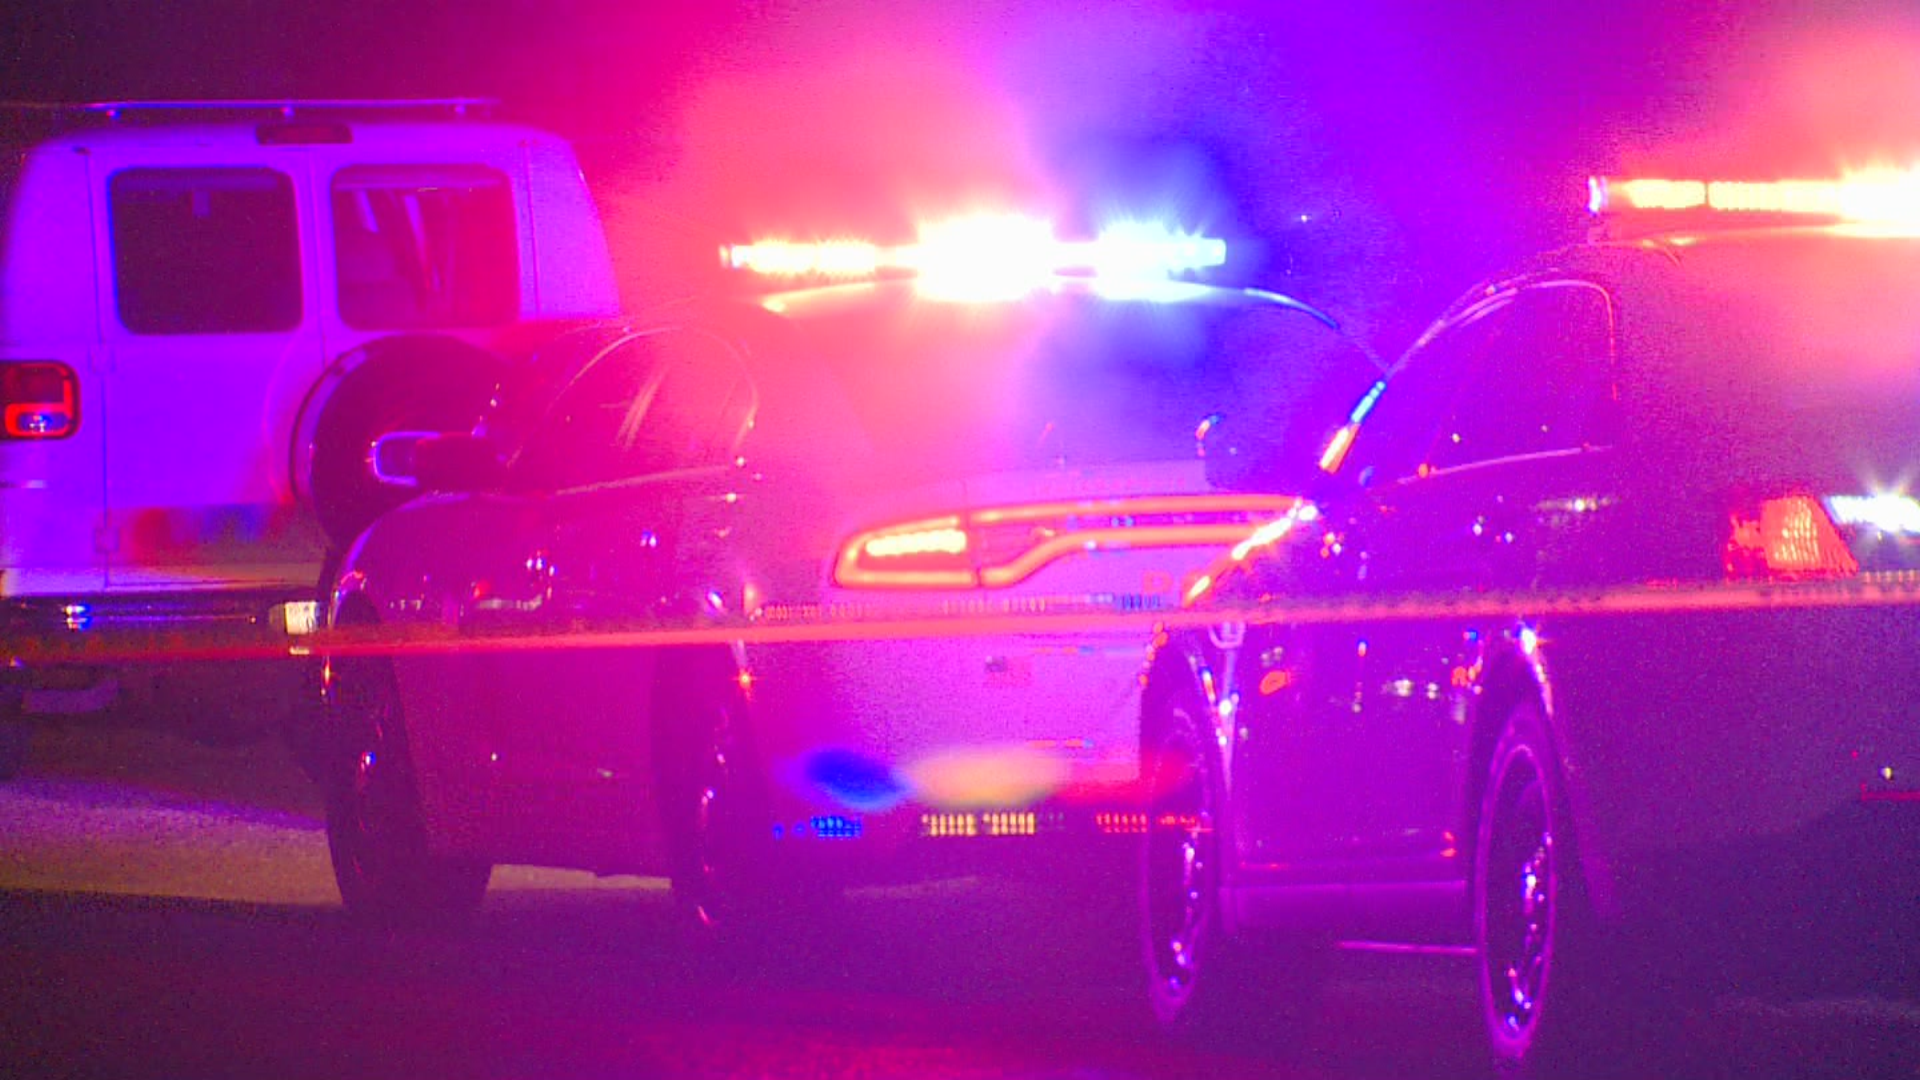 Man killed, 2 others injured in overnight shootings in Indianapolis